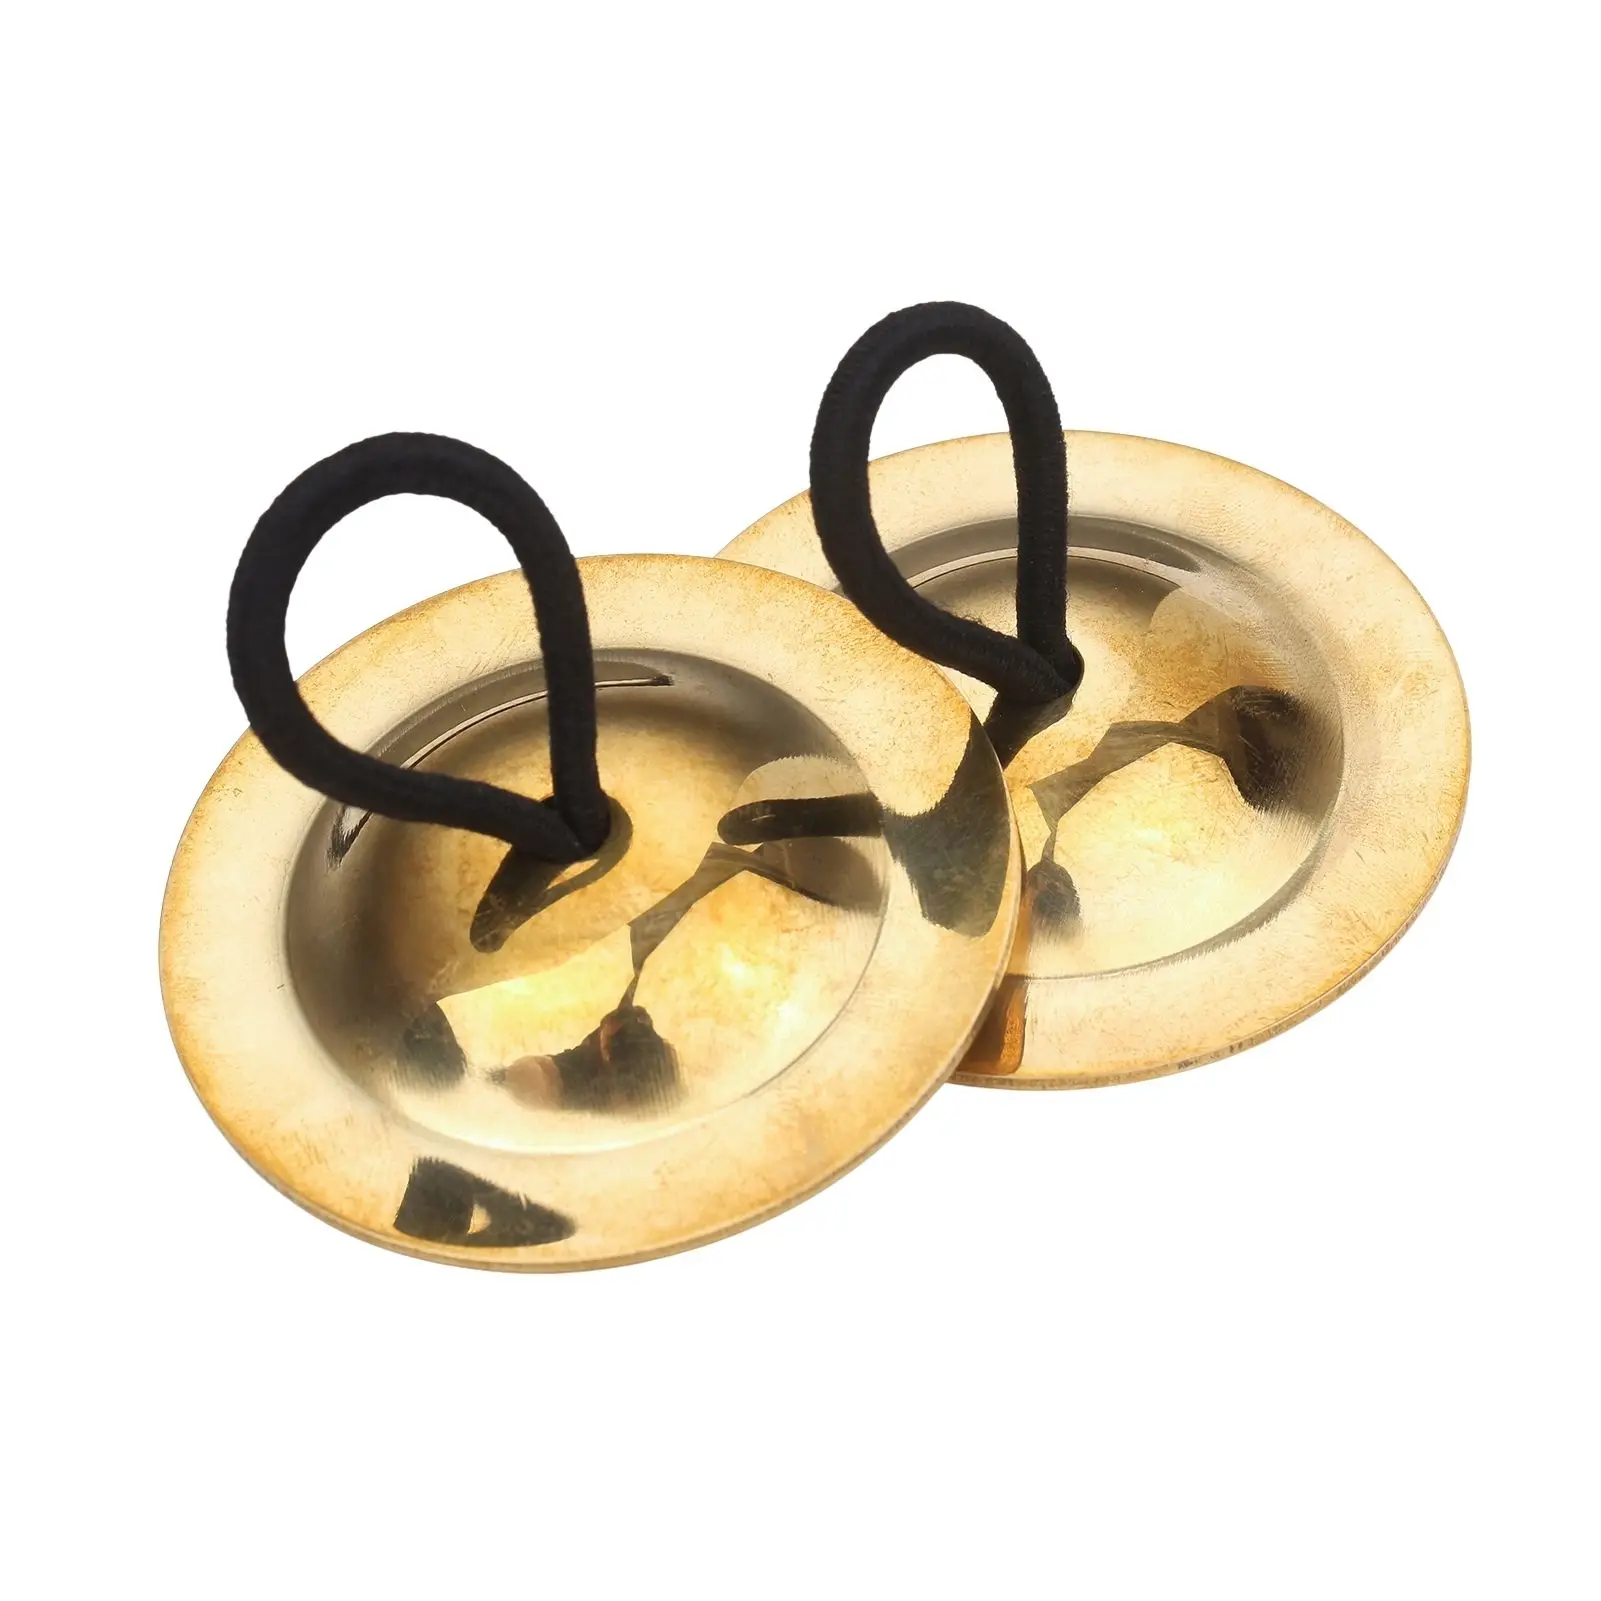 Festnight 2PCS Finger Cymbals Belly Dance Accessories Small Size Hand Percussion Instruments Golden 